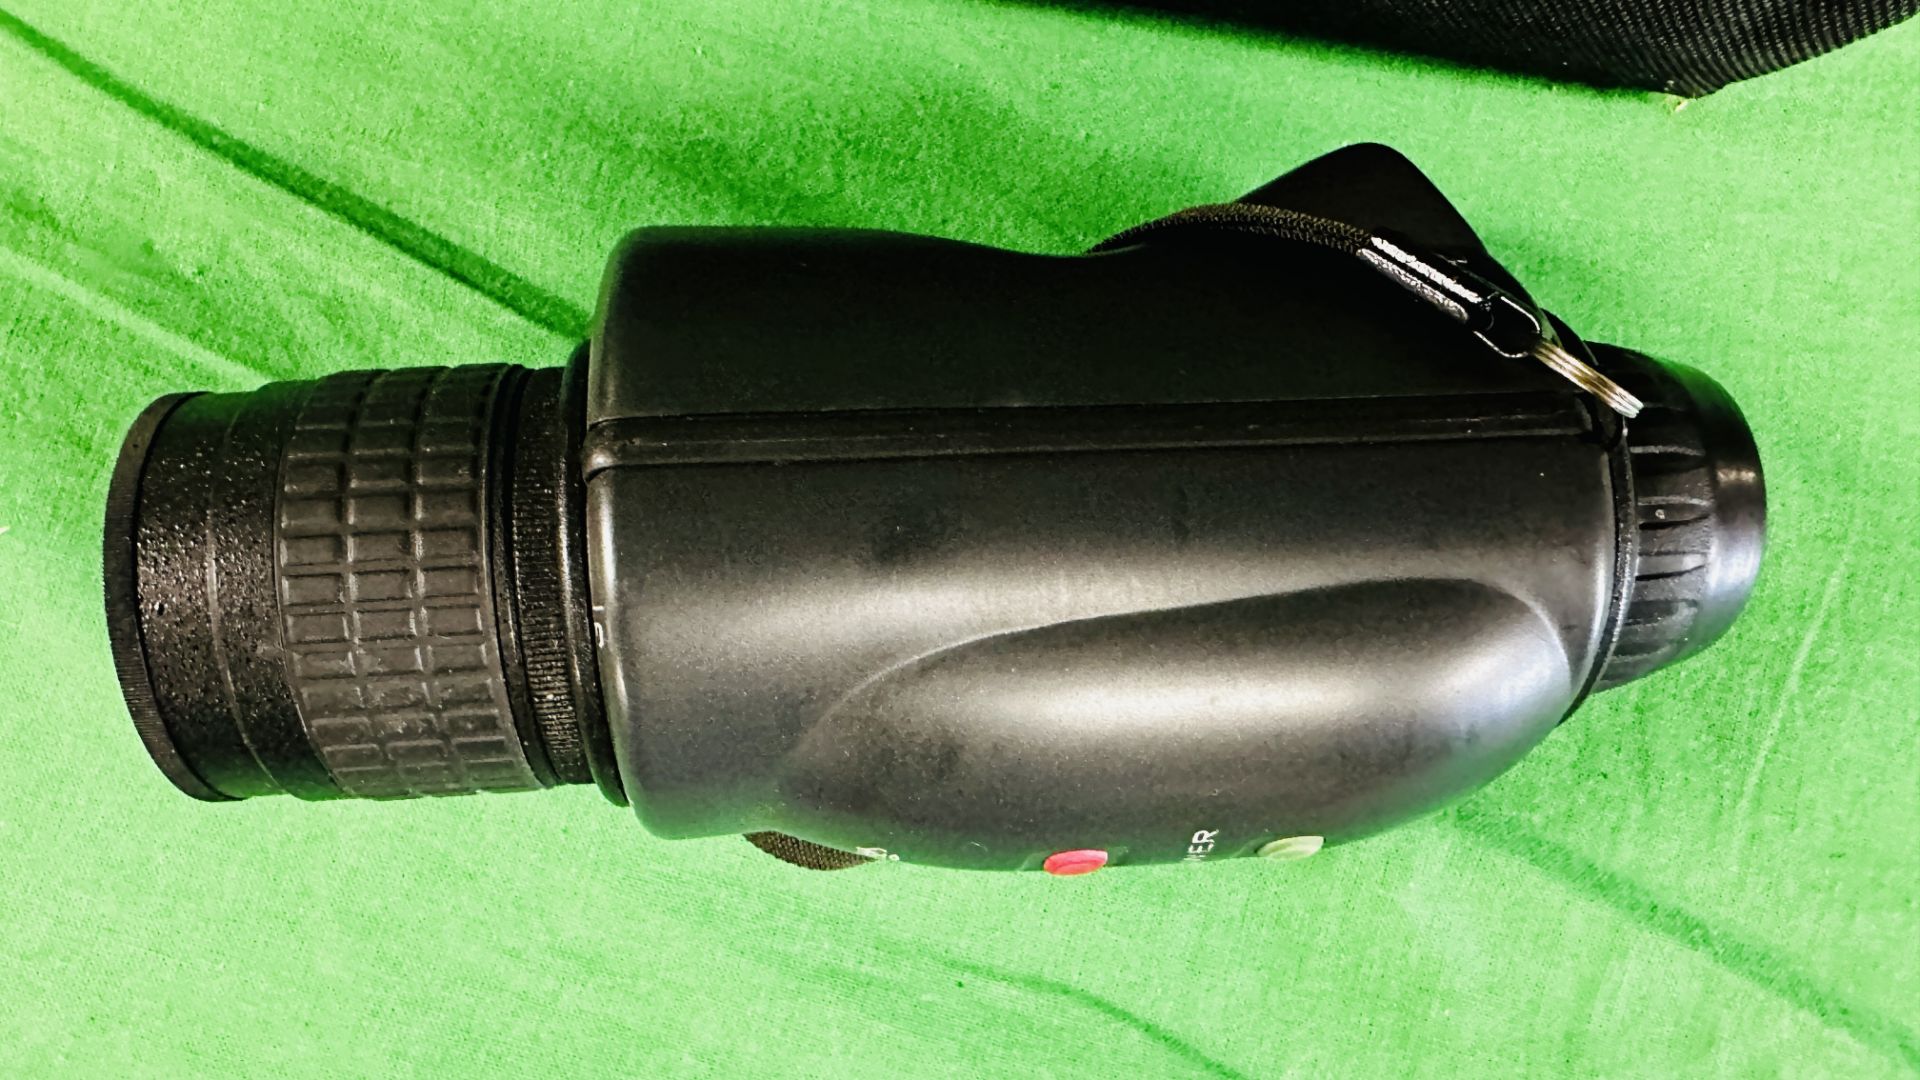 A NEWCON NIGHT VISION SCOPE IN CASE. - Image 3 of 5